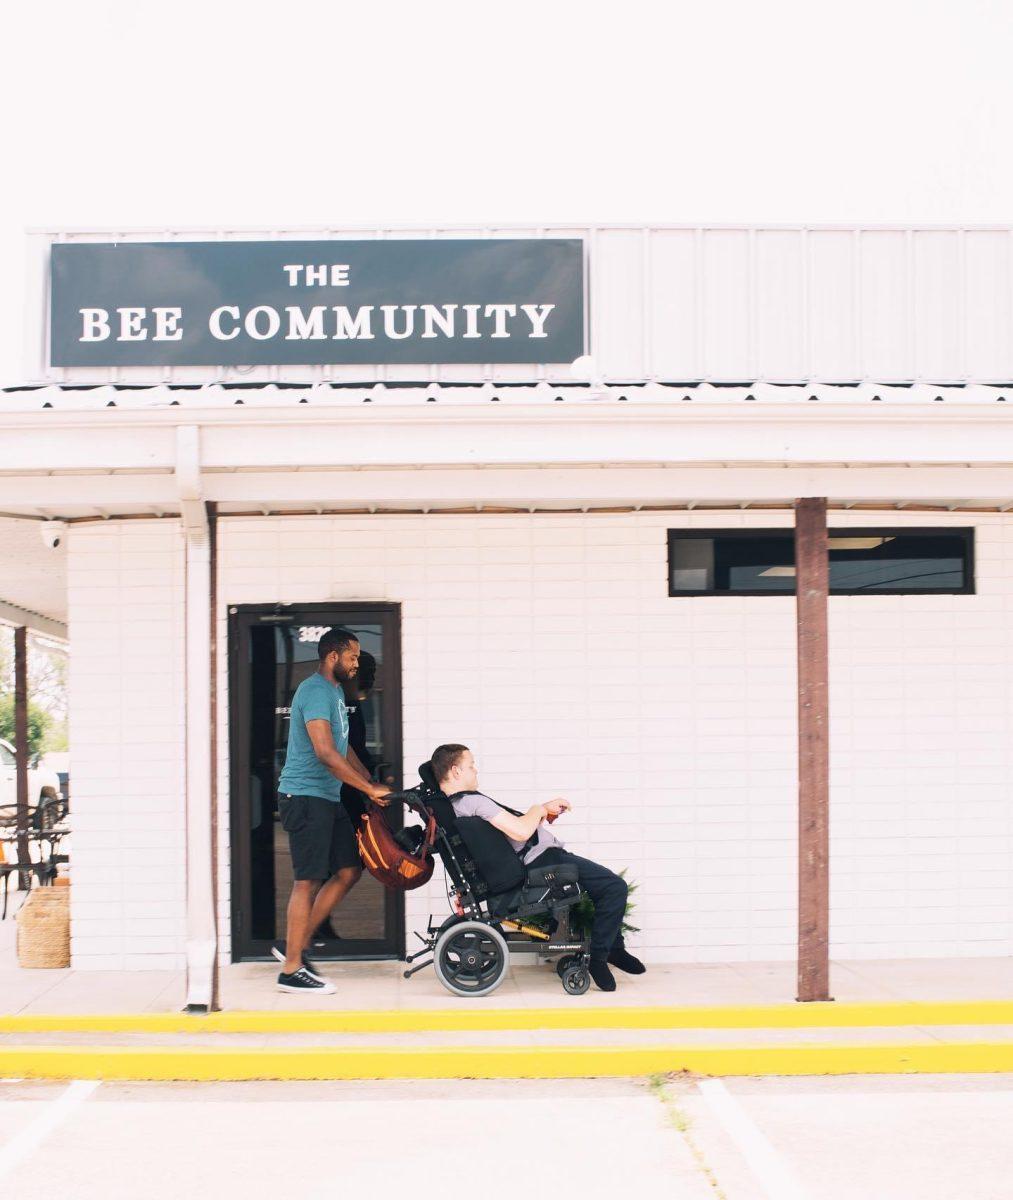 Since+2018%2C+The+BEE+Community+has+been+providing+friendship+and+employment+opportunities+for+special+needs+adults+in+the+Bryan-College+Station+community.%26%23160%3B